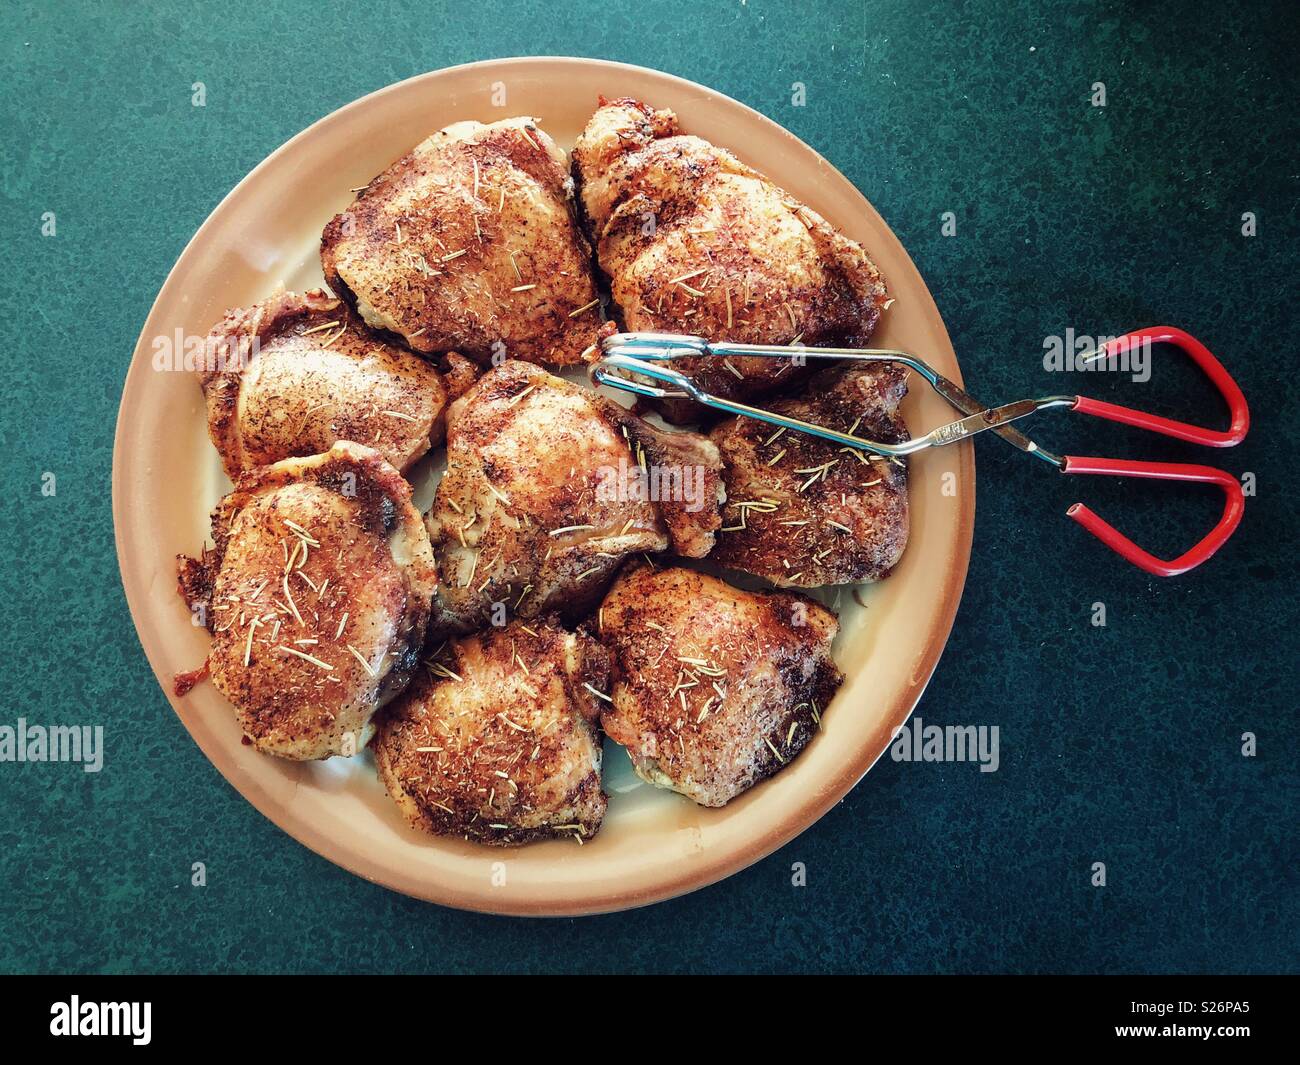 Oven roasted, herb crusted chicken thighs on a plate with tongs Stock Photo